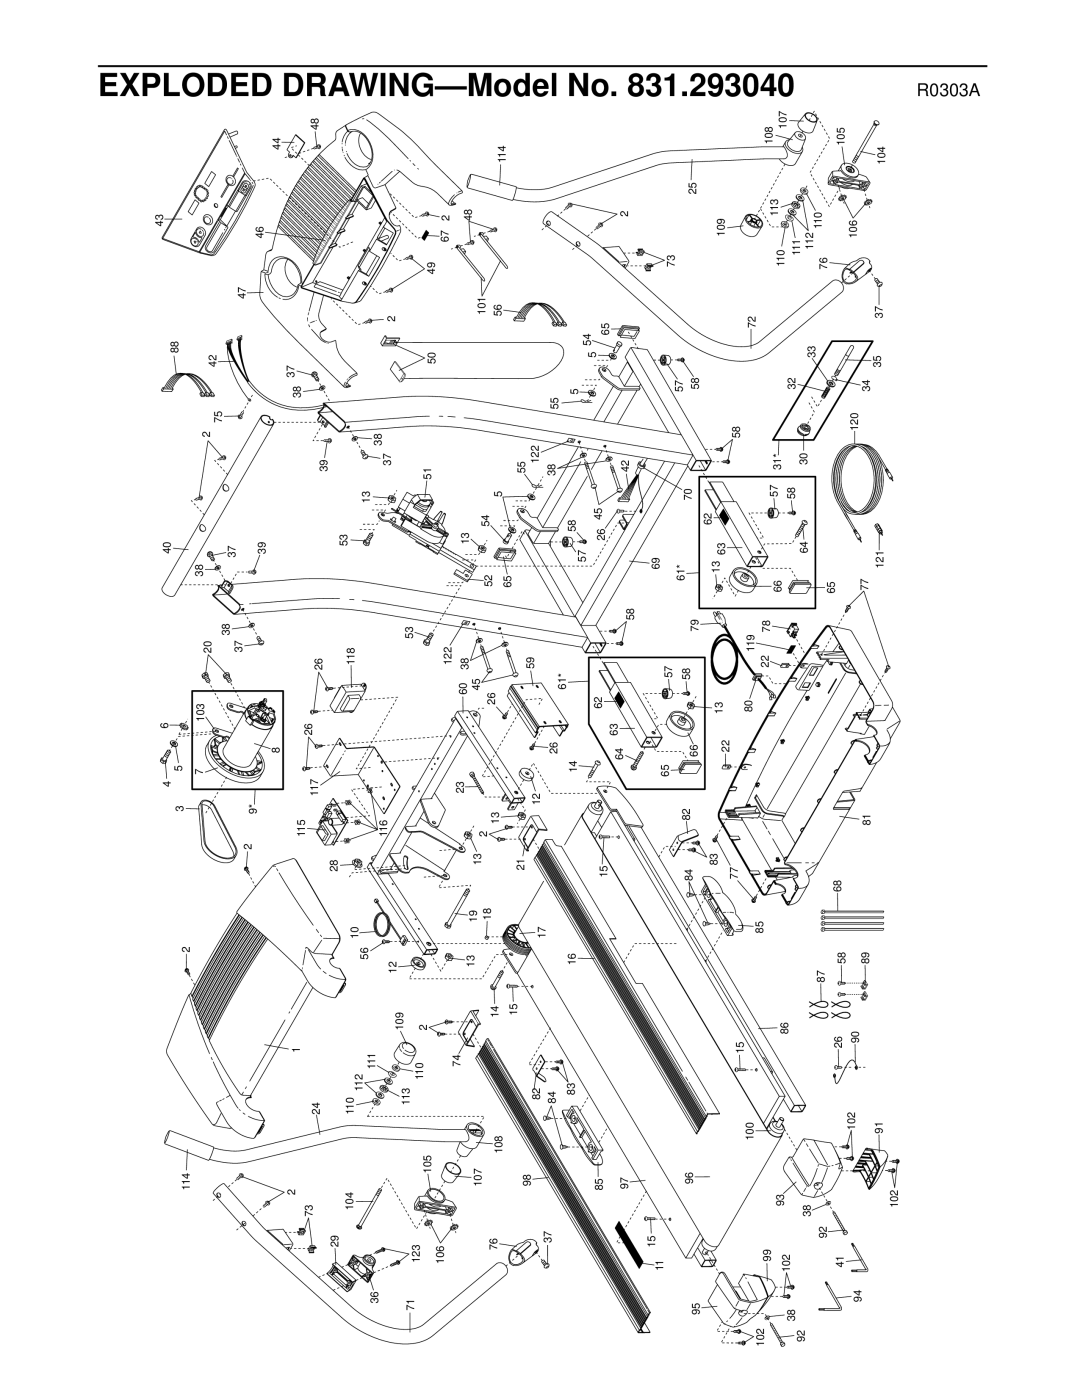 ProForm 831.293040 user manual DRAWING-Model, Exploded 